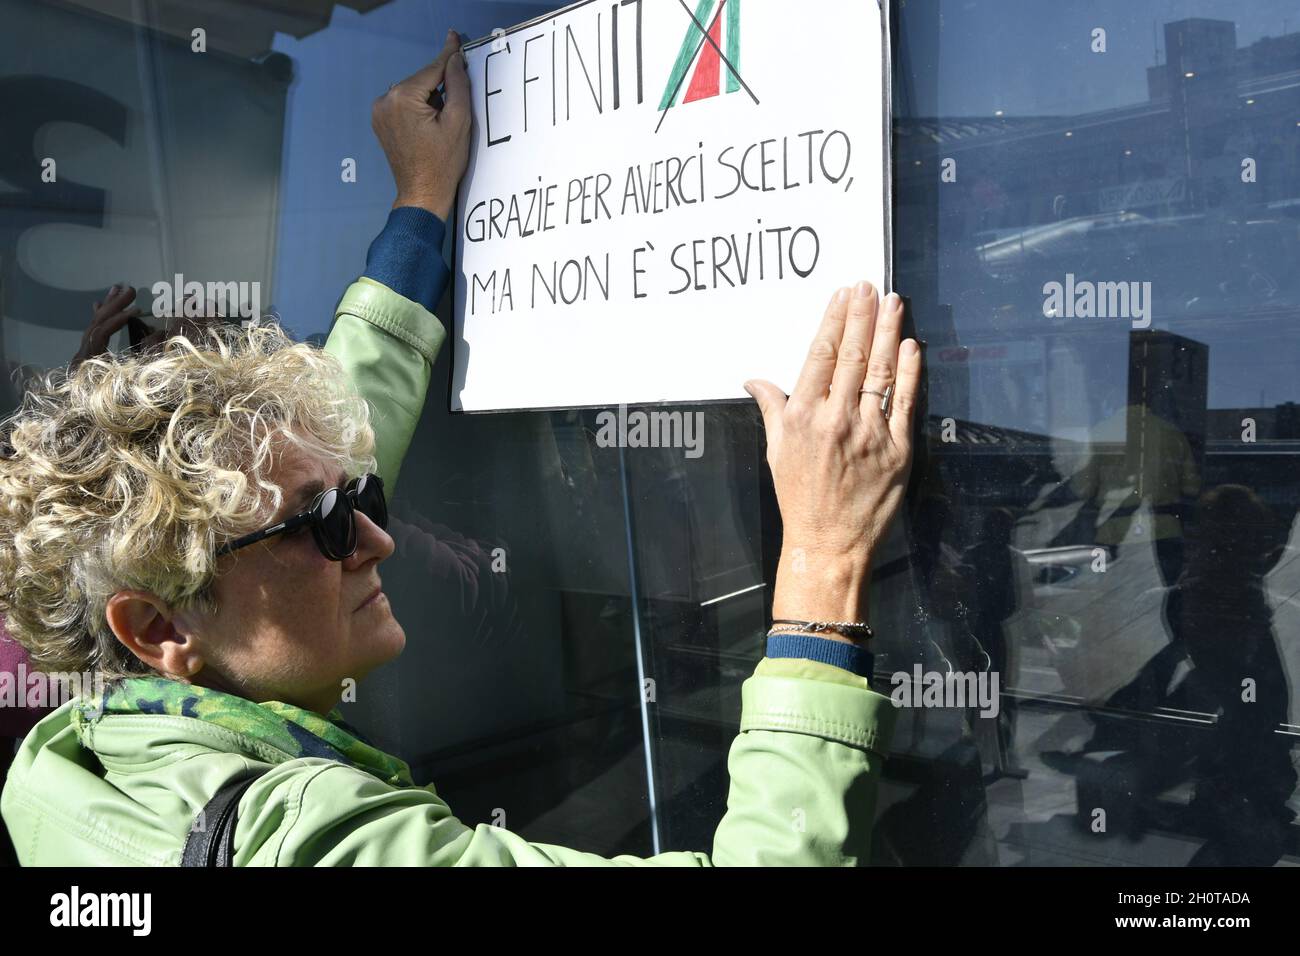 Fiumicino, Italy October 14, 2021, Images of the demonstration of Alitalia employees at Fiumicino Airport, protesting the closure of the Company, Fiumicino, Italy October 14, 2021 Stock Photo